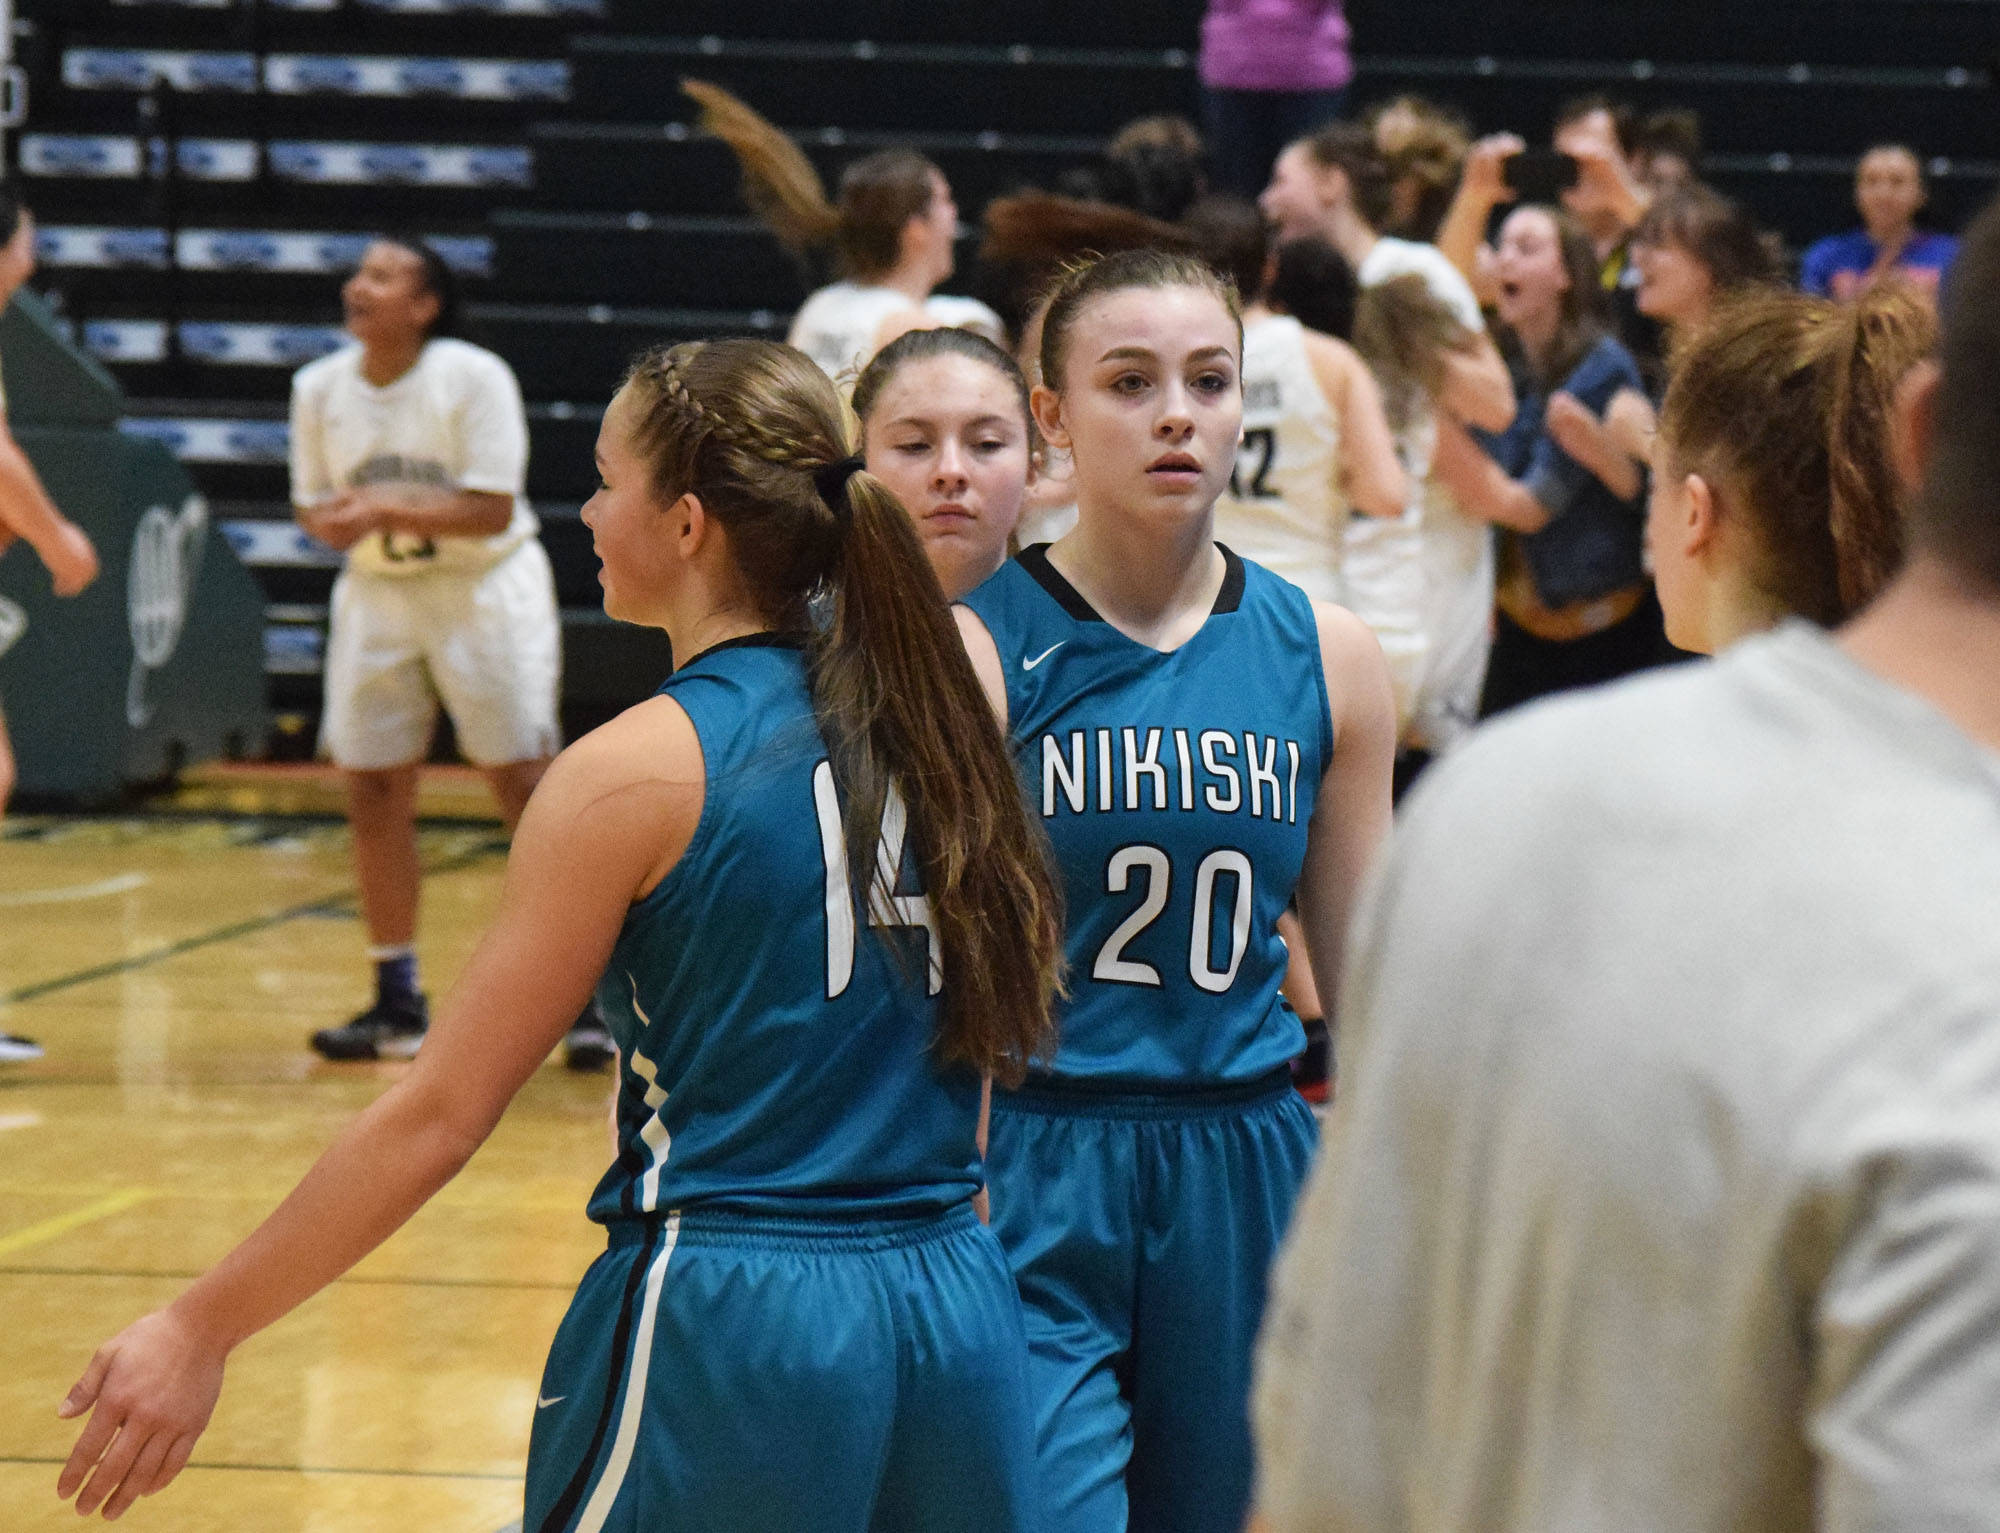 Bethany Carstens (20) walks back to the bench with her Nikiski teammates Saturday, March 23, 2019, following a loss to ACS in the Class 3A girls state basketball championship at the Alaska Airlines Center in Anchorage. (Photo by Joey Klecka/Peninsula Clarion)